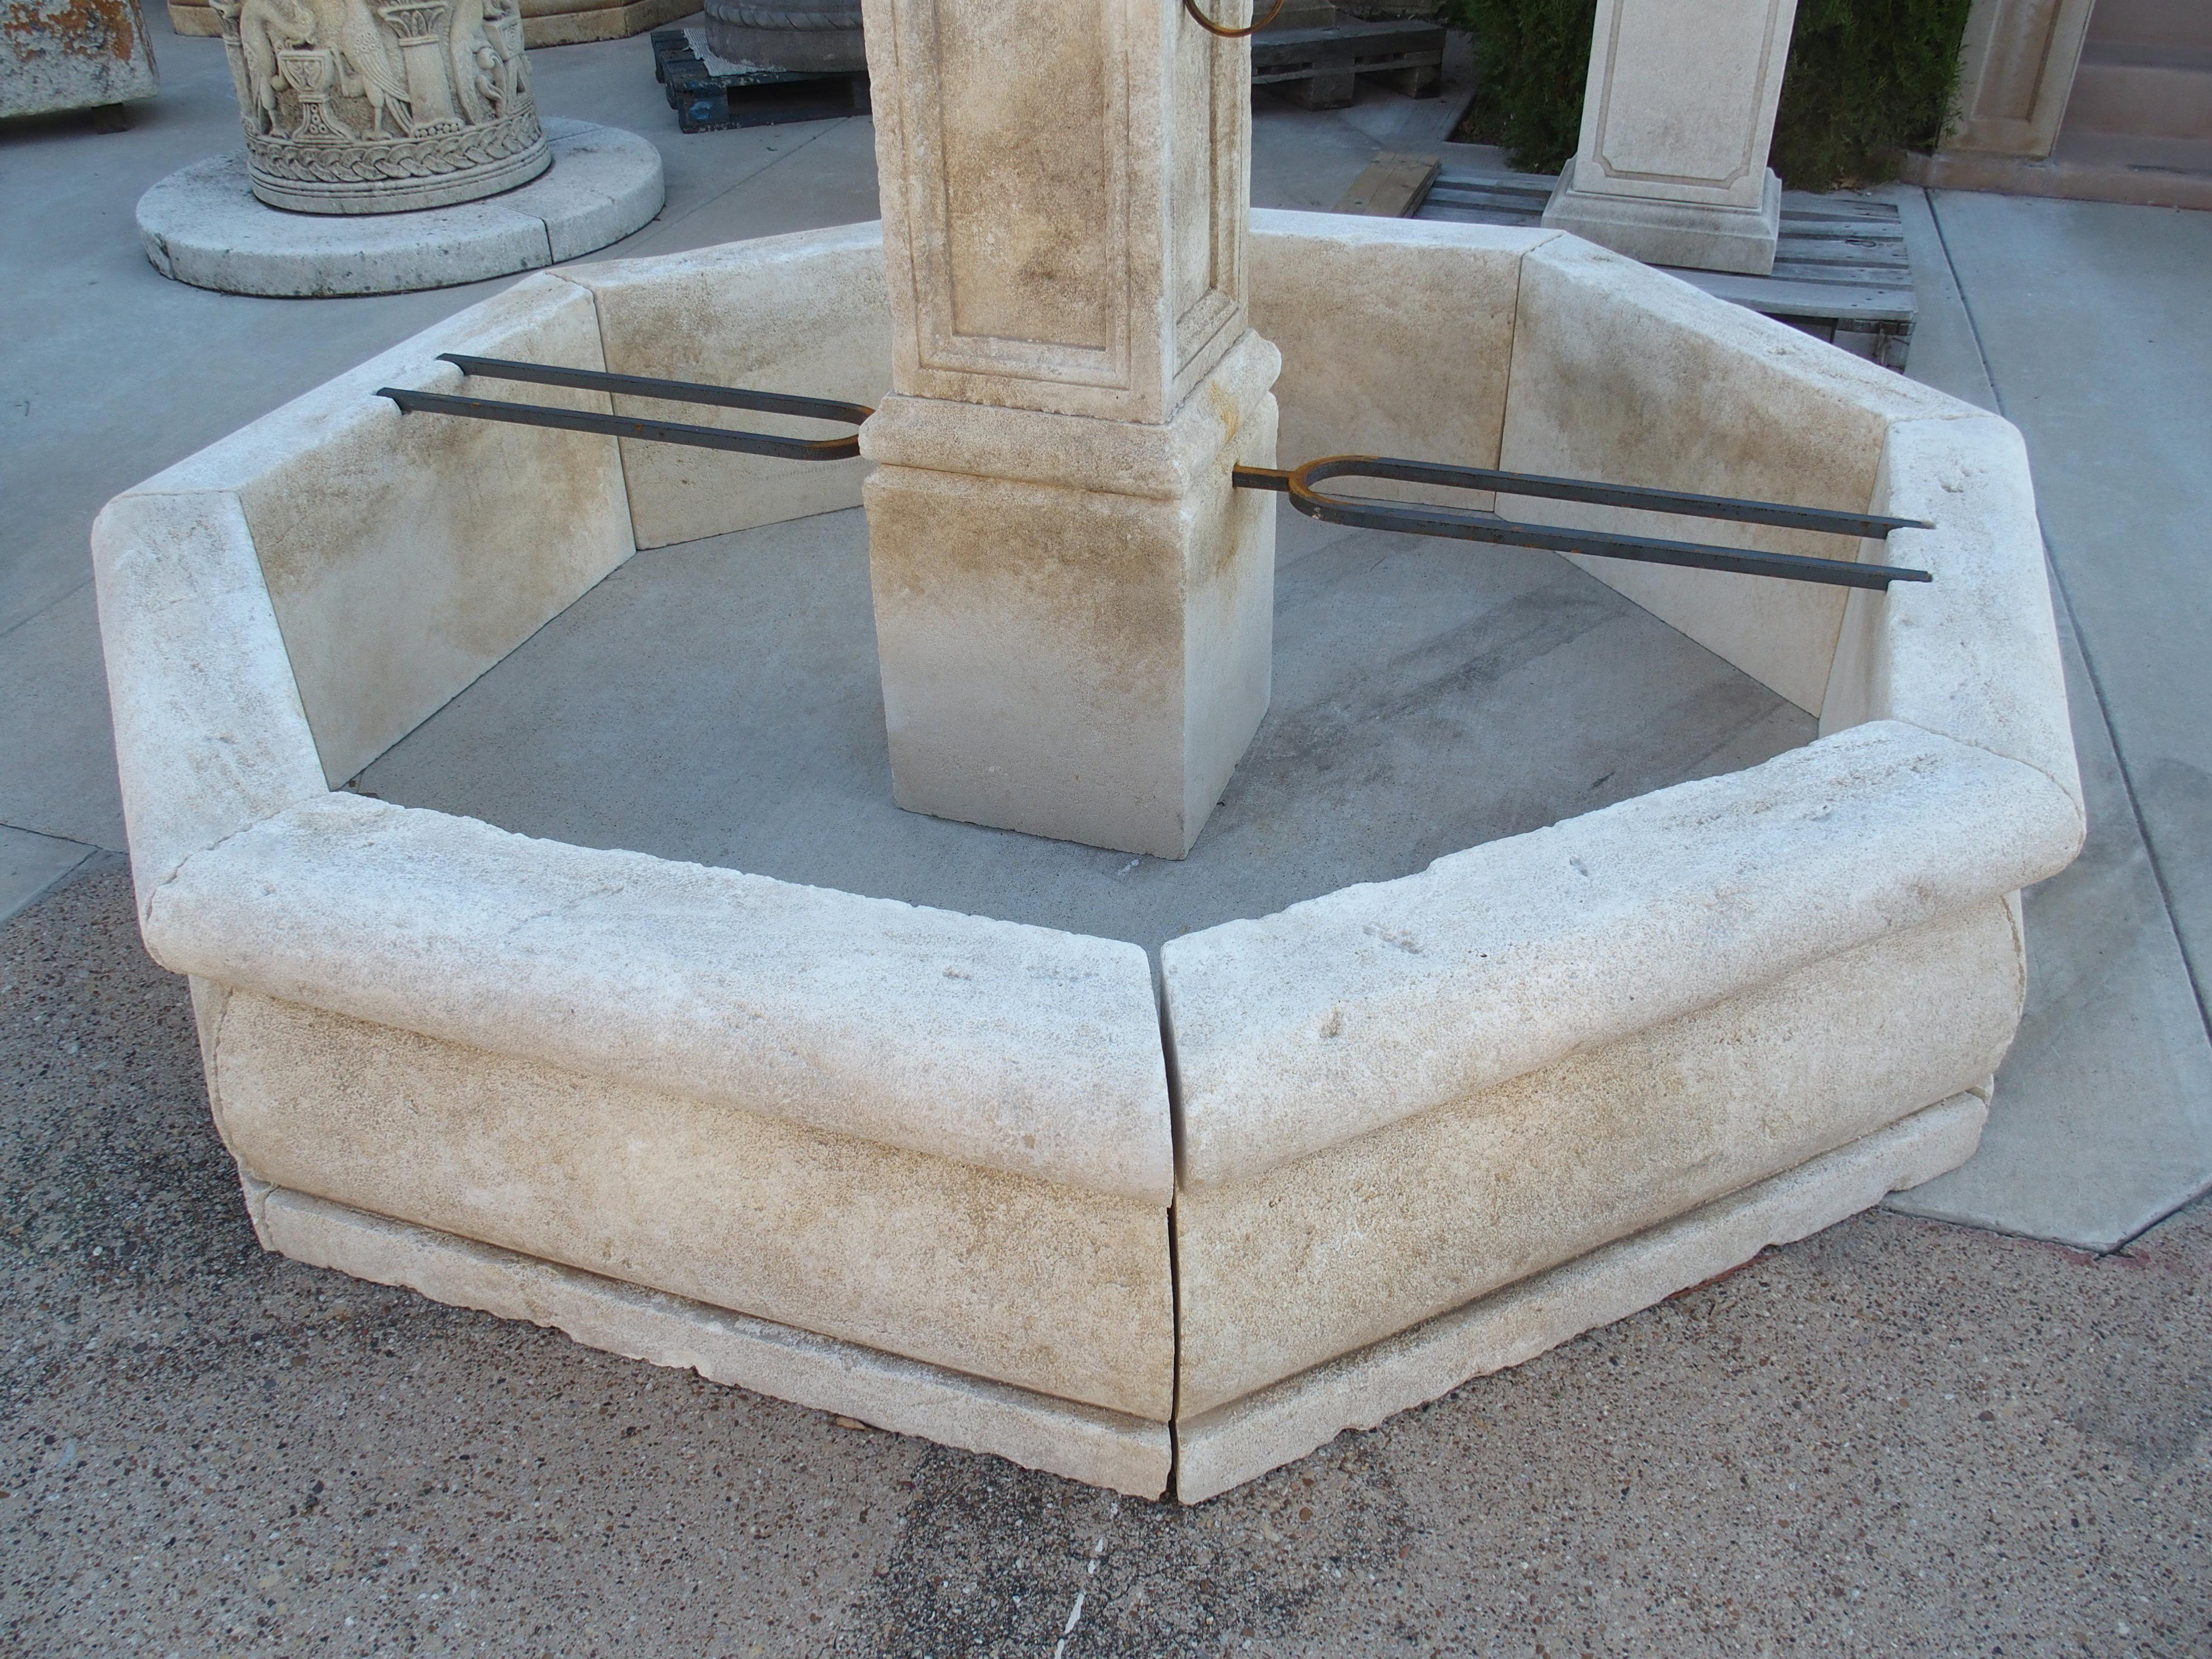 This large octagonal center fountain from Provence has been hand-carved from 15 pieces of Estaillade limestone. The center column has a ball finial on top of a square plinth. Beneath a second, larger plinth is a thick cornice with cavetto molding. A